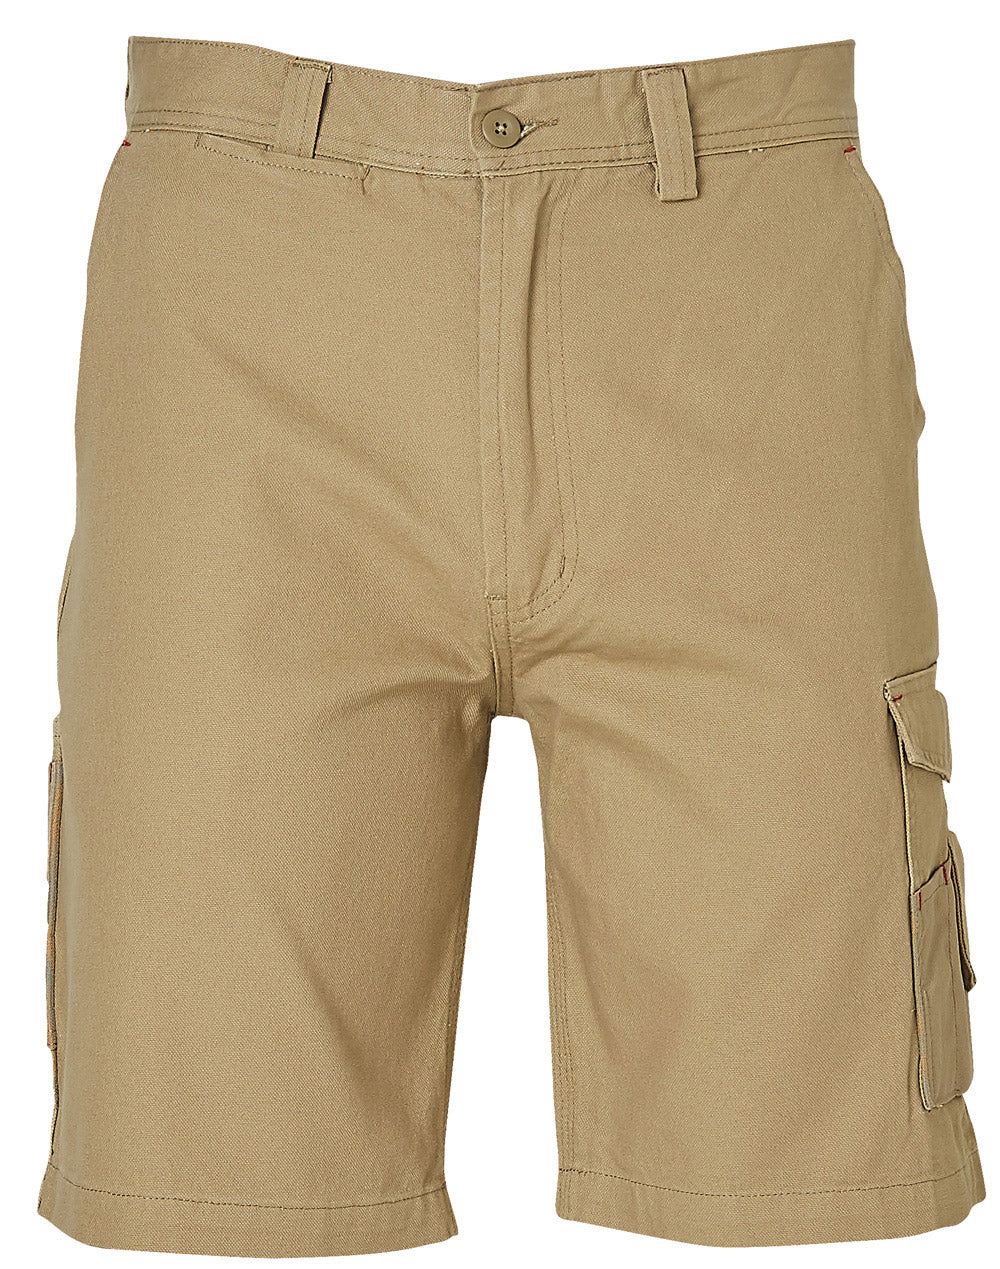 Durawear Cargo Shorts - made by AIW